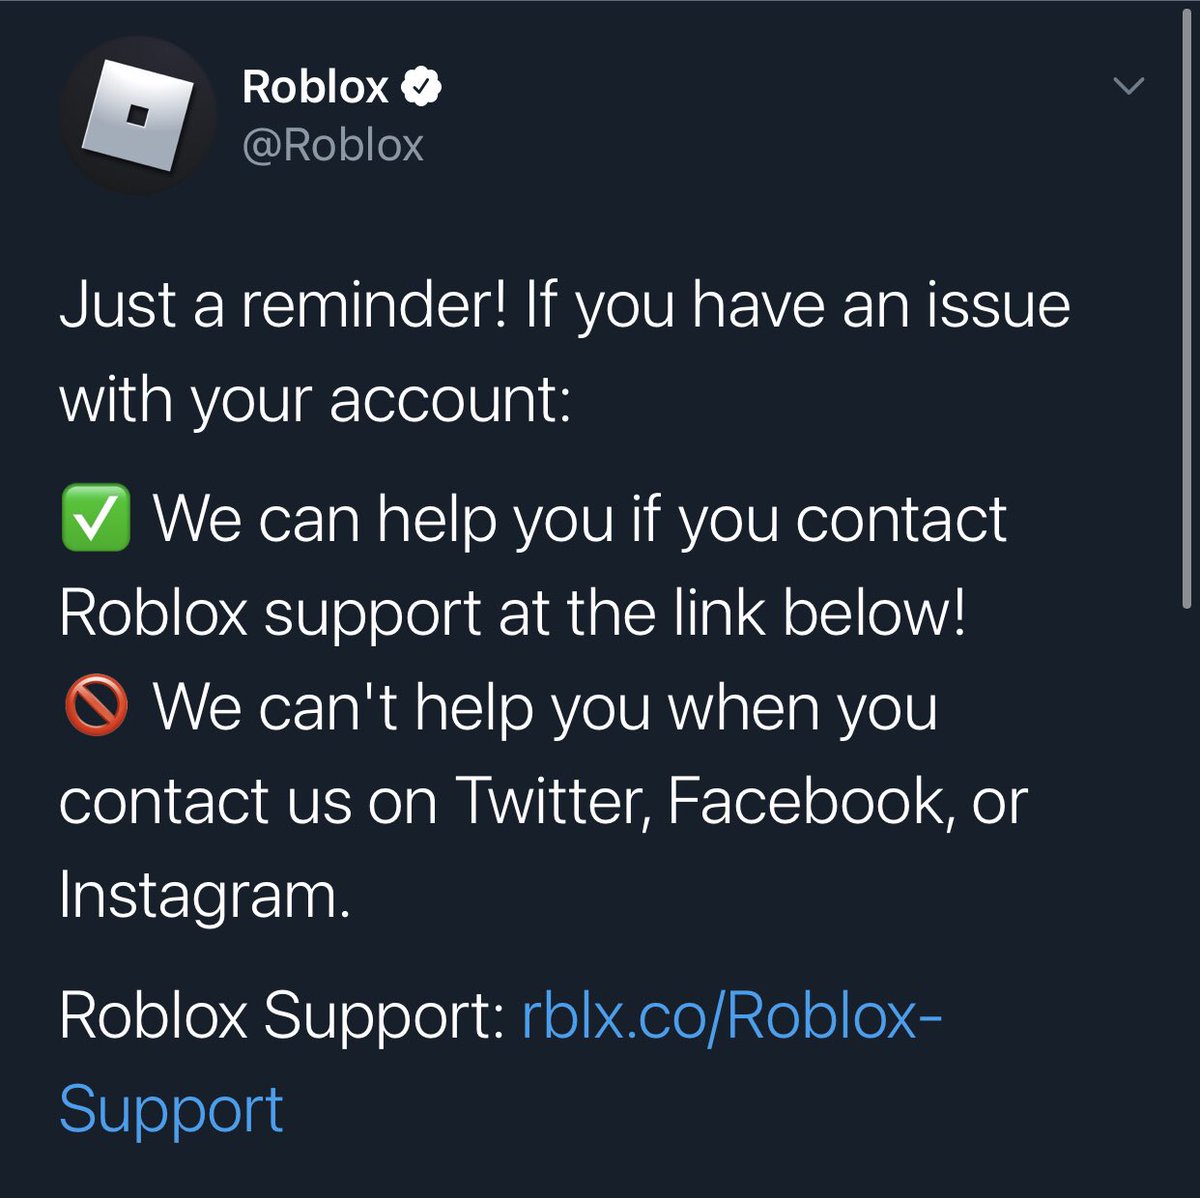 Roblox On Twitter Just A Reminder If You Have An Issue With Your Account We Can Help You If You Contact Roblox Support At The Link Below We Can T Help - roblox account login issue